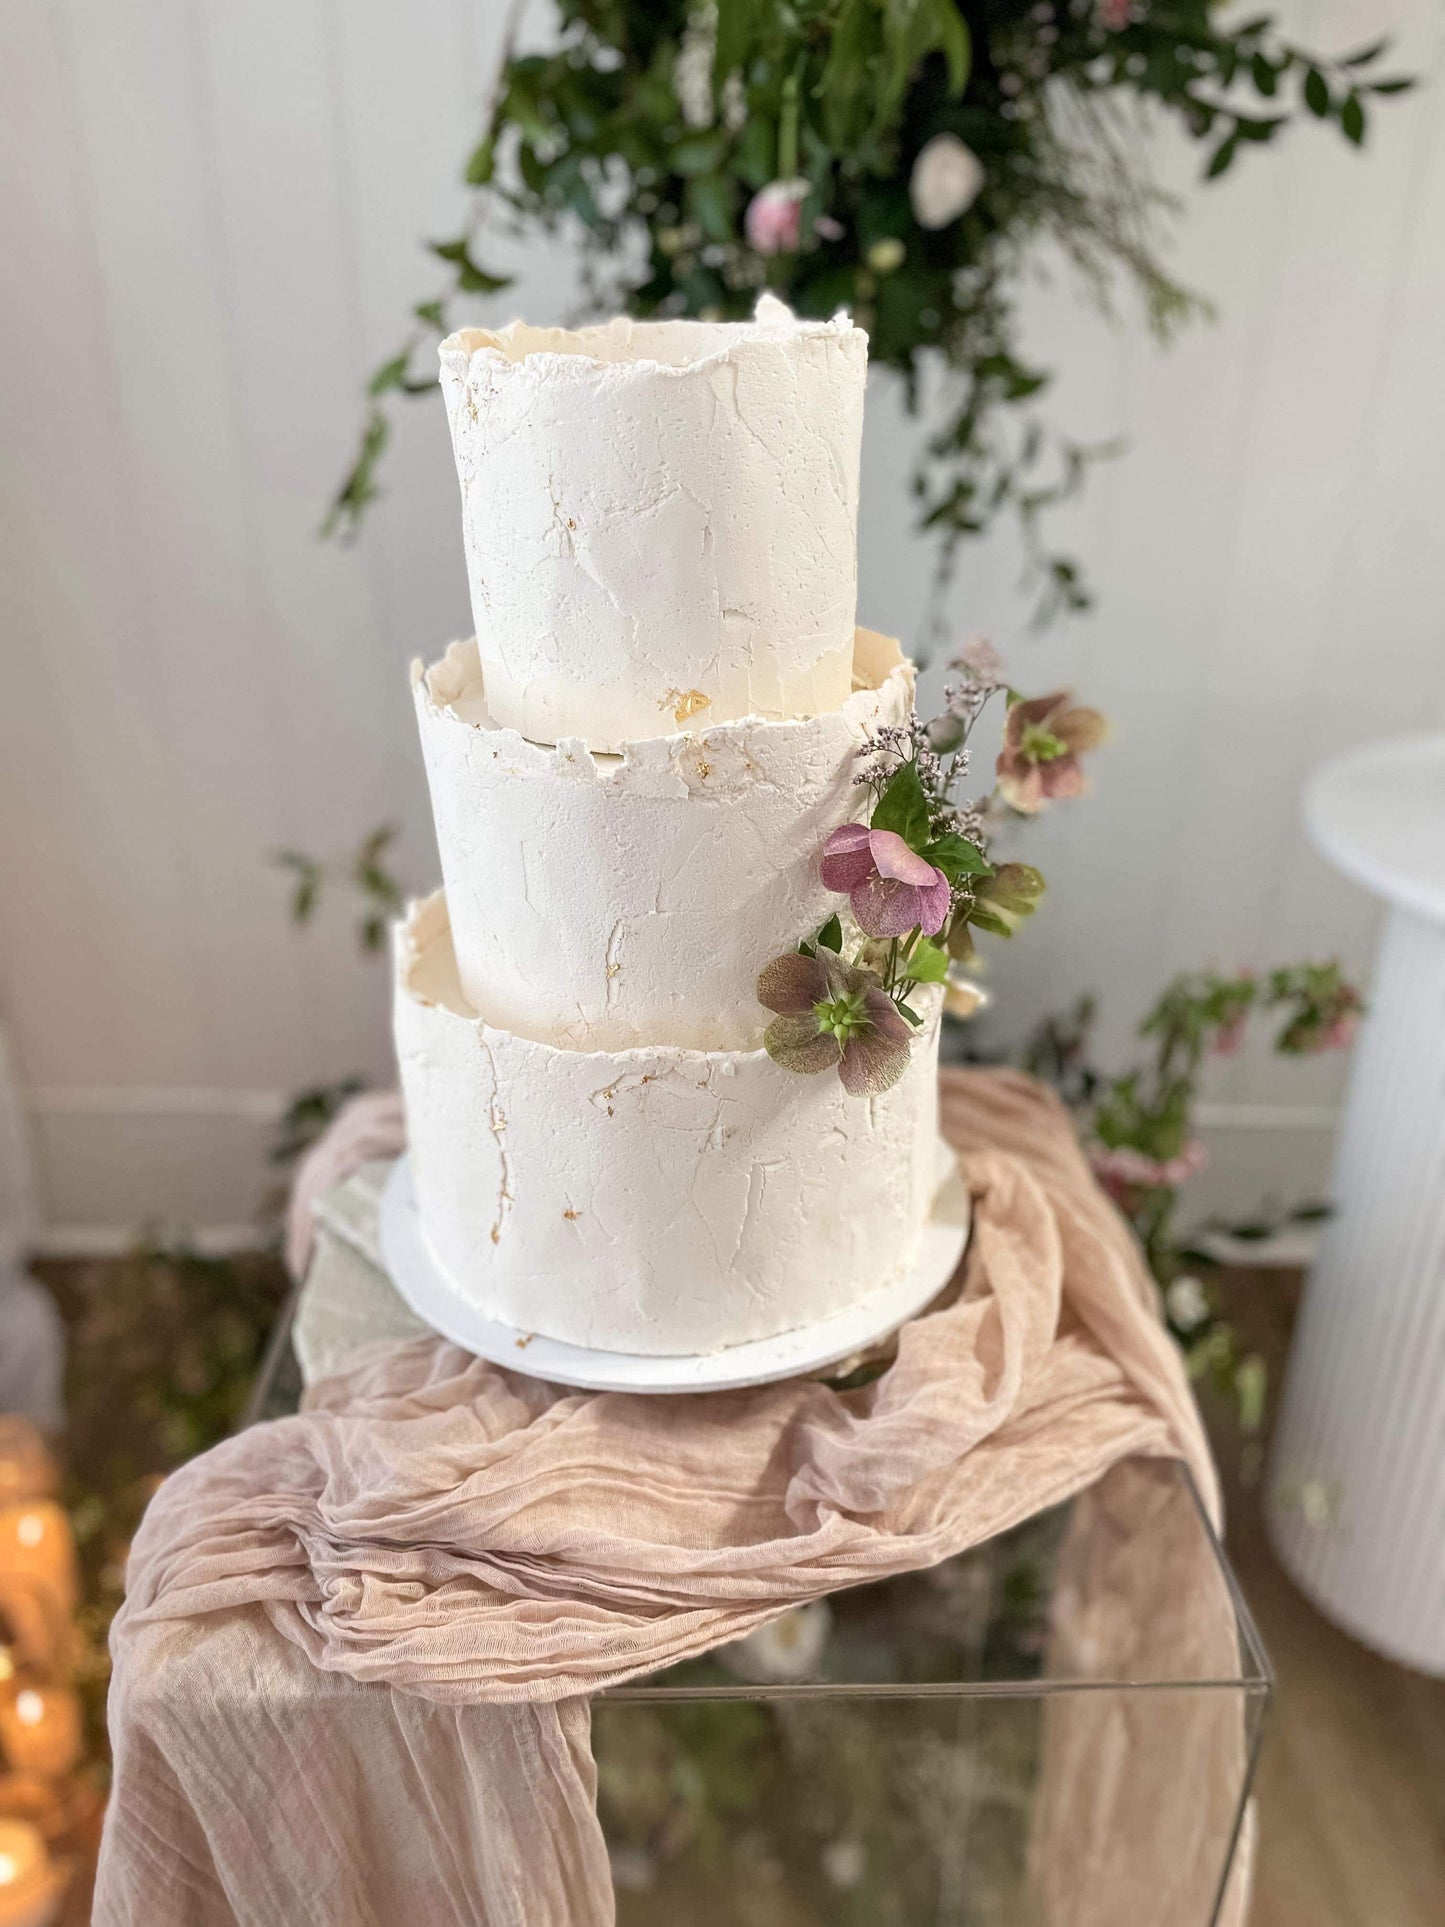 3 Tier Contemporary Buttercream cake with fresh flowers